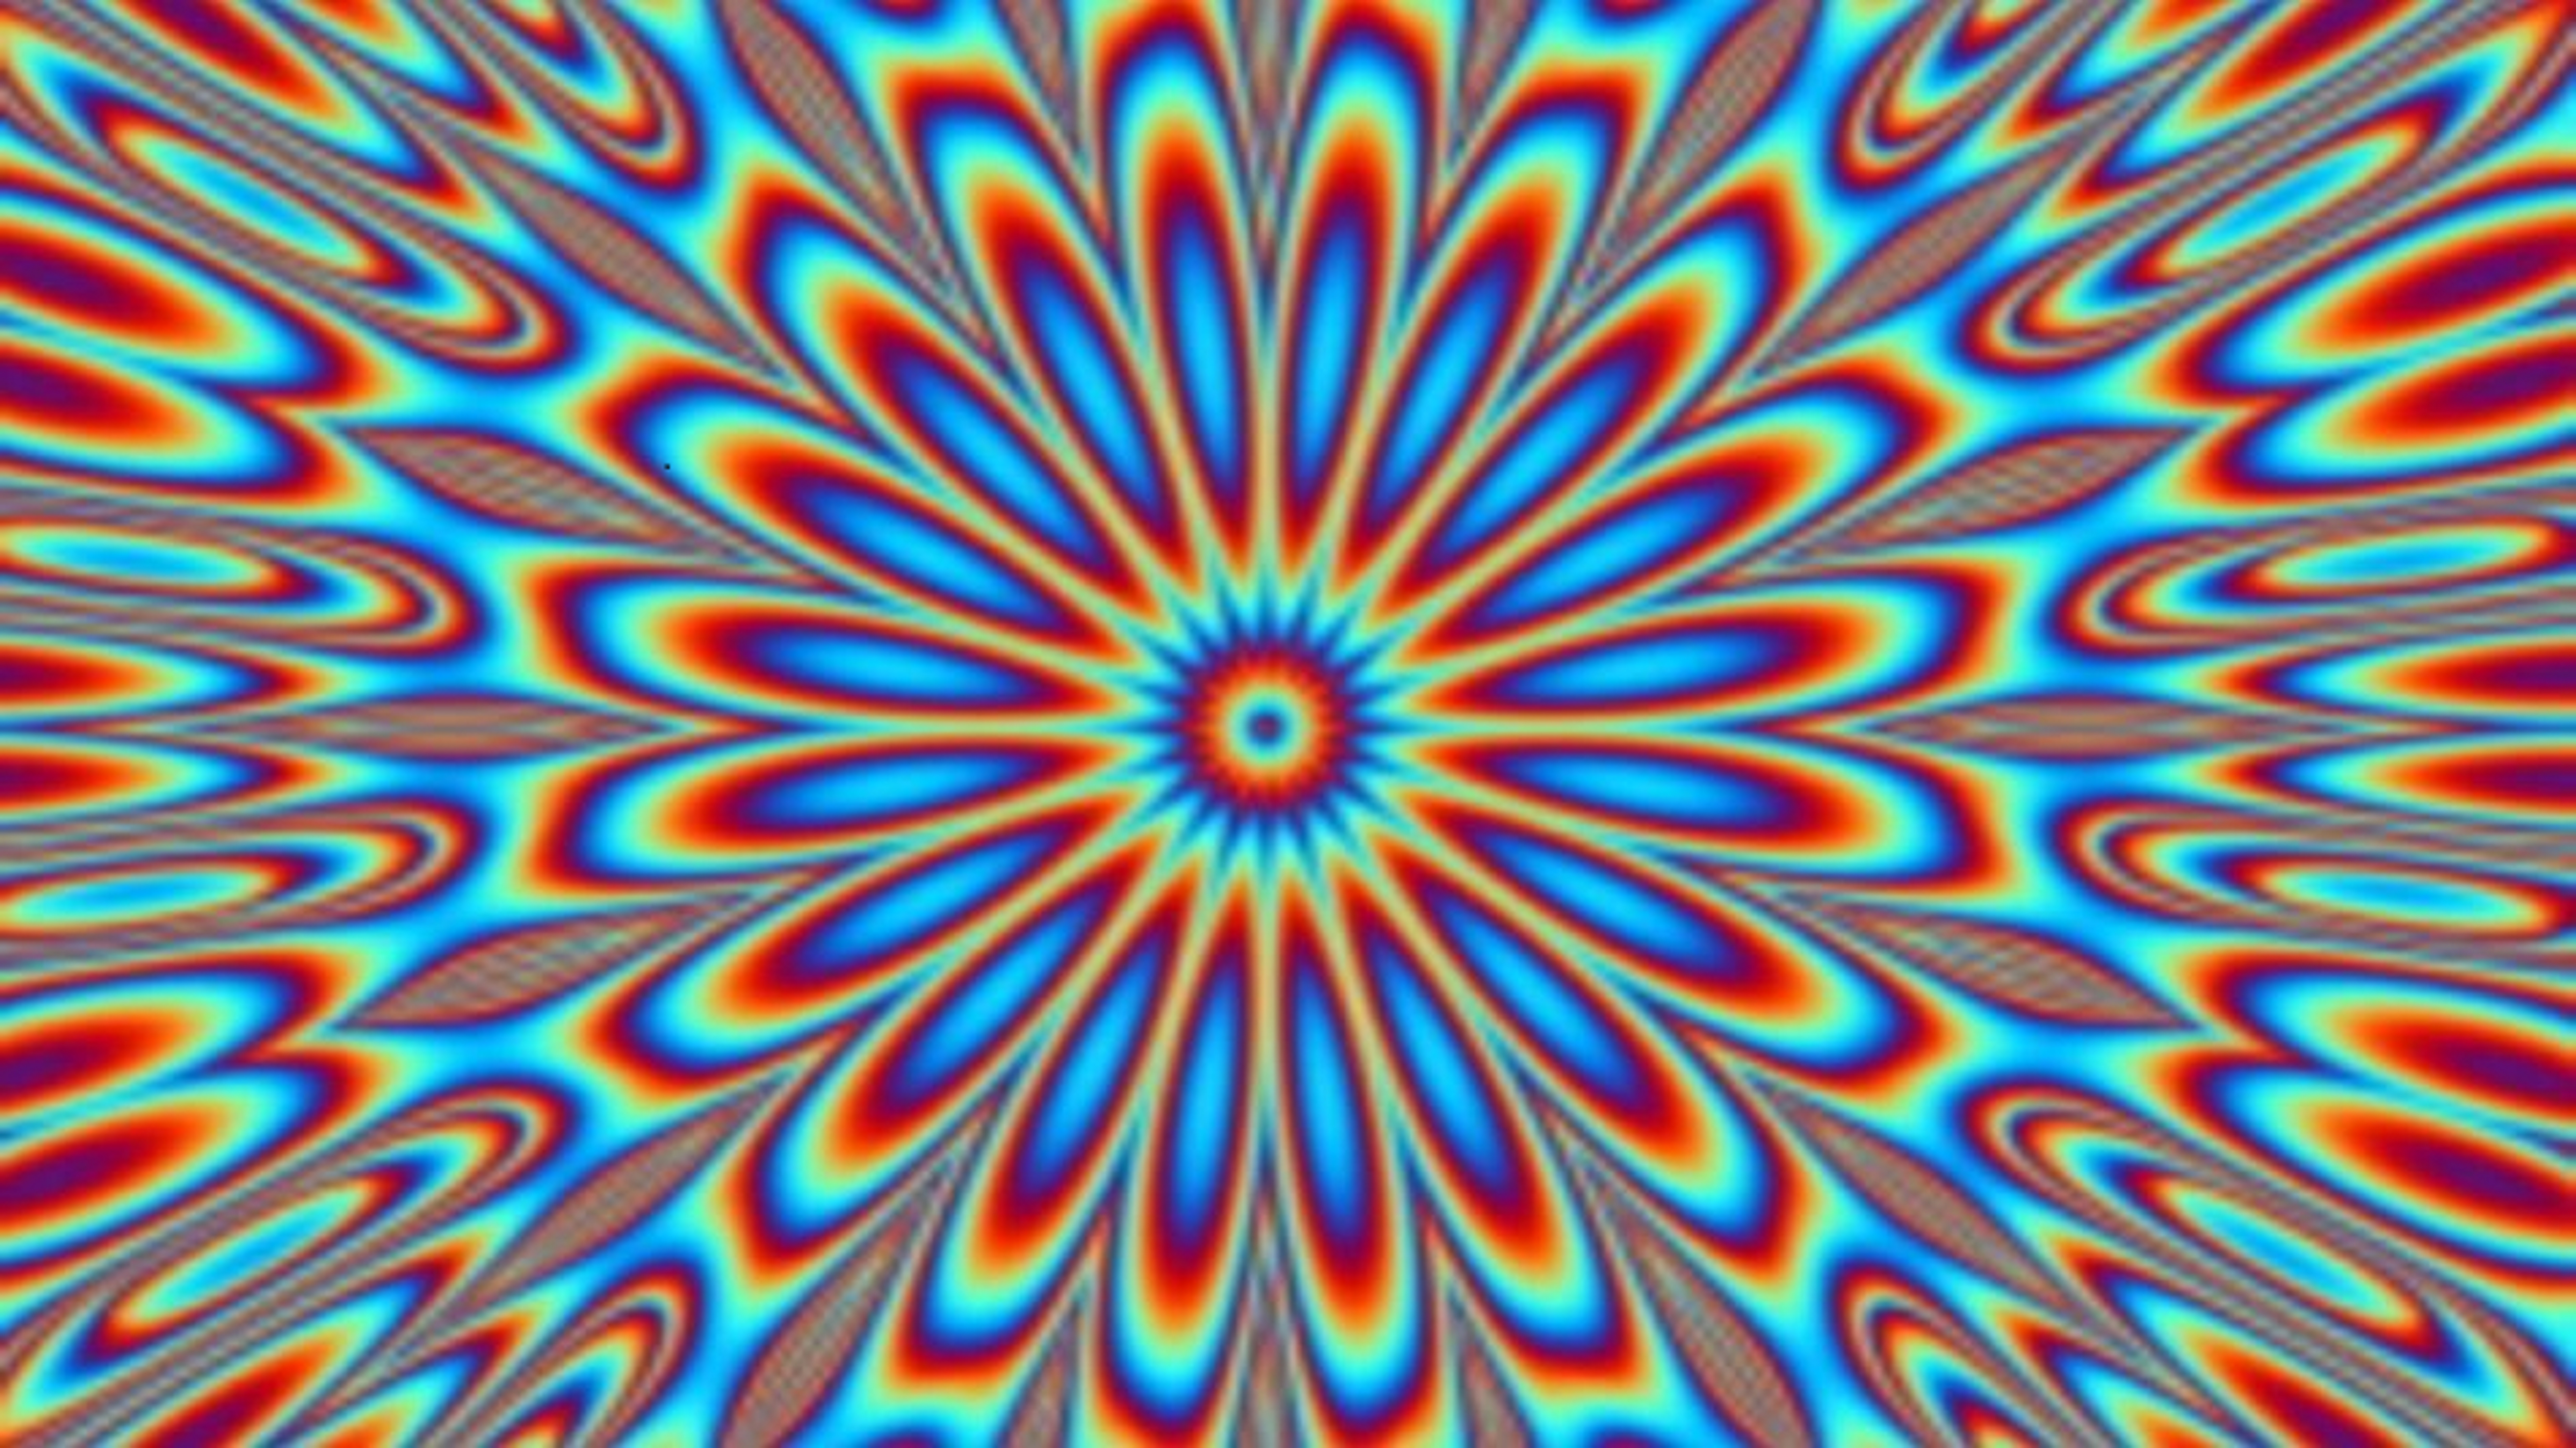 532 psychedelic hd wallpapers